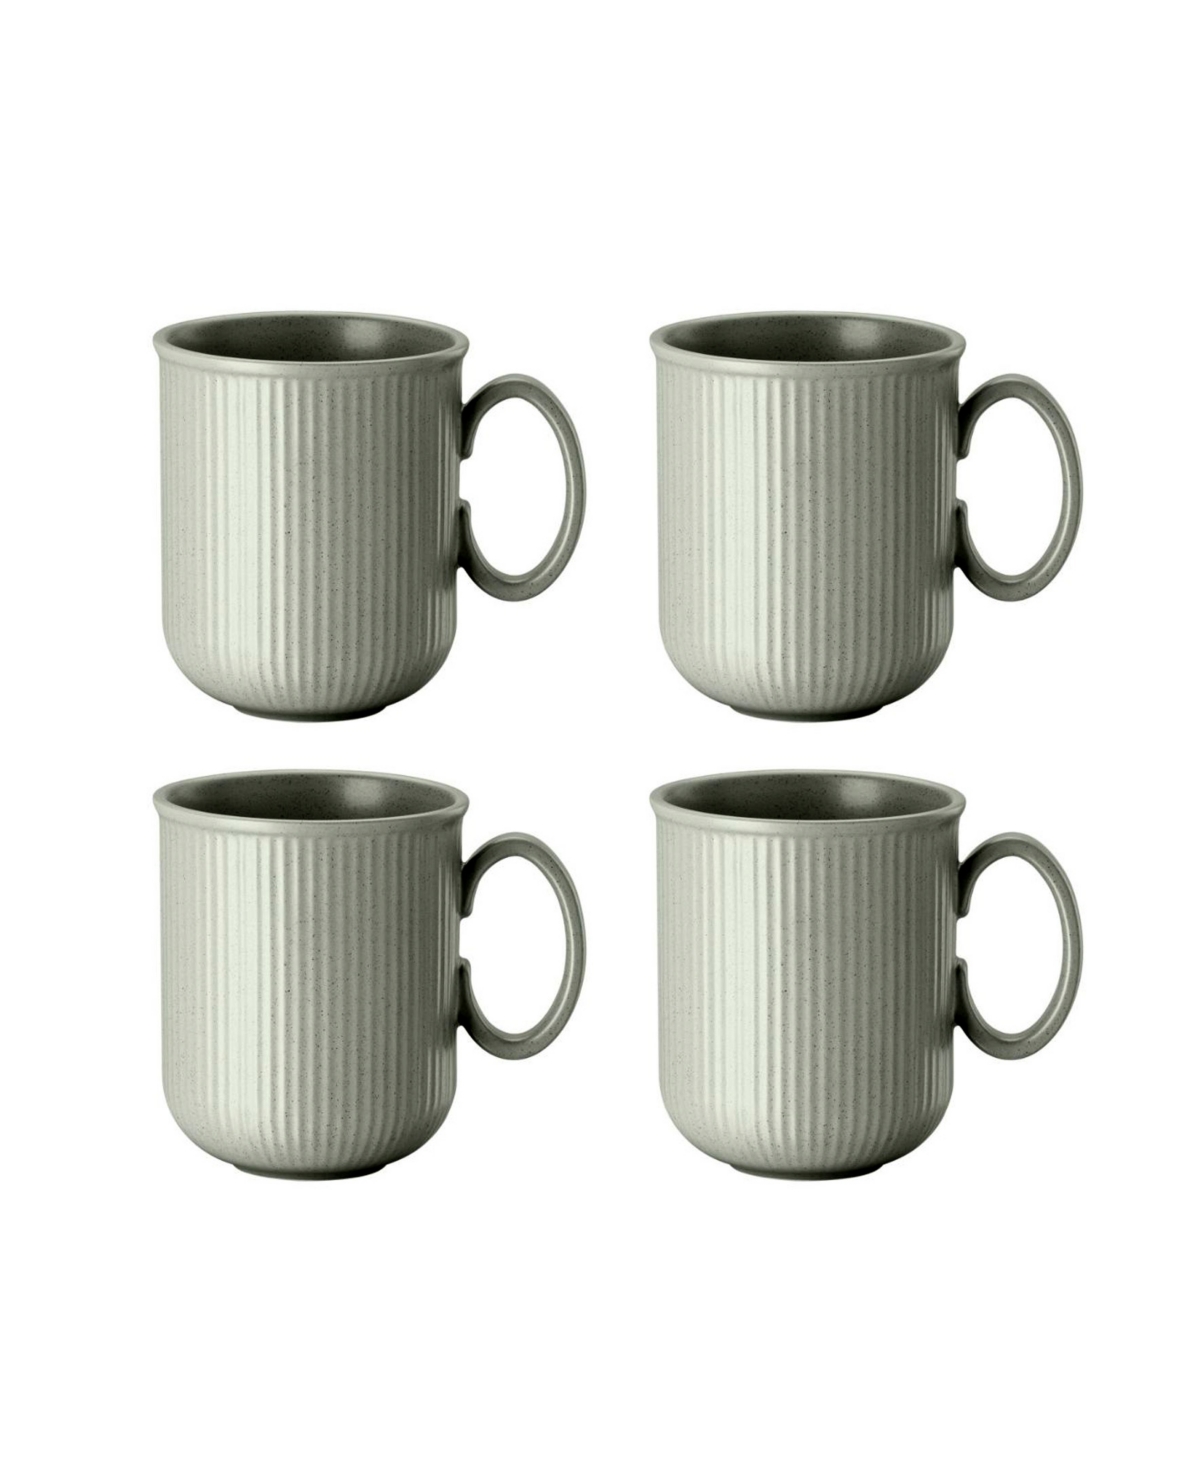 Clay Set of 4 Mugs, Service for 4 - Gray